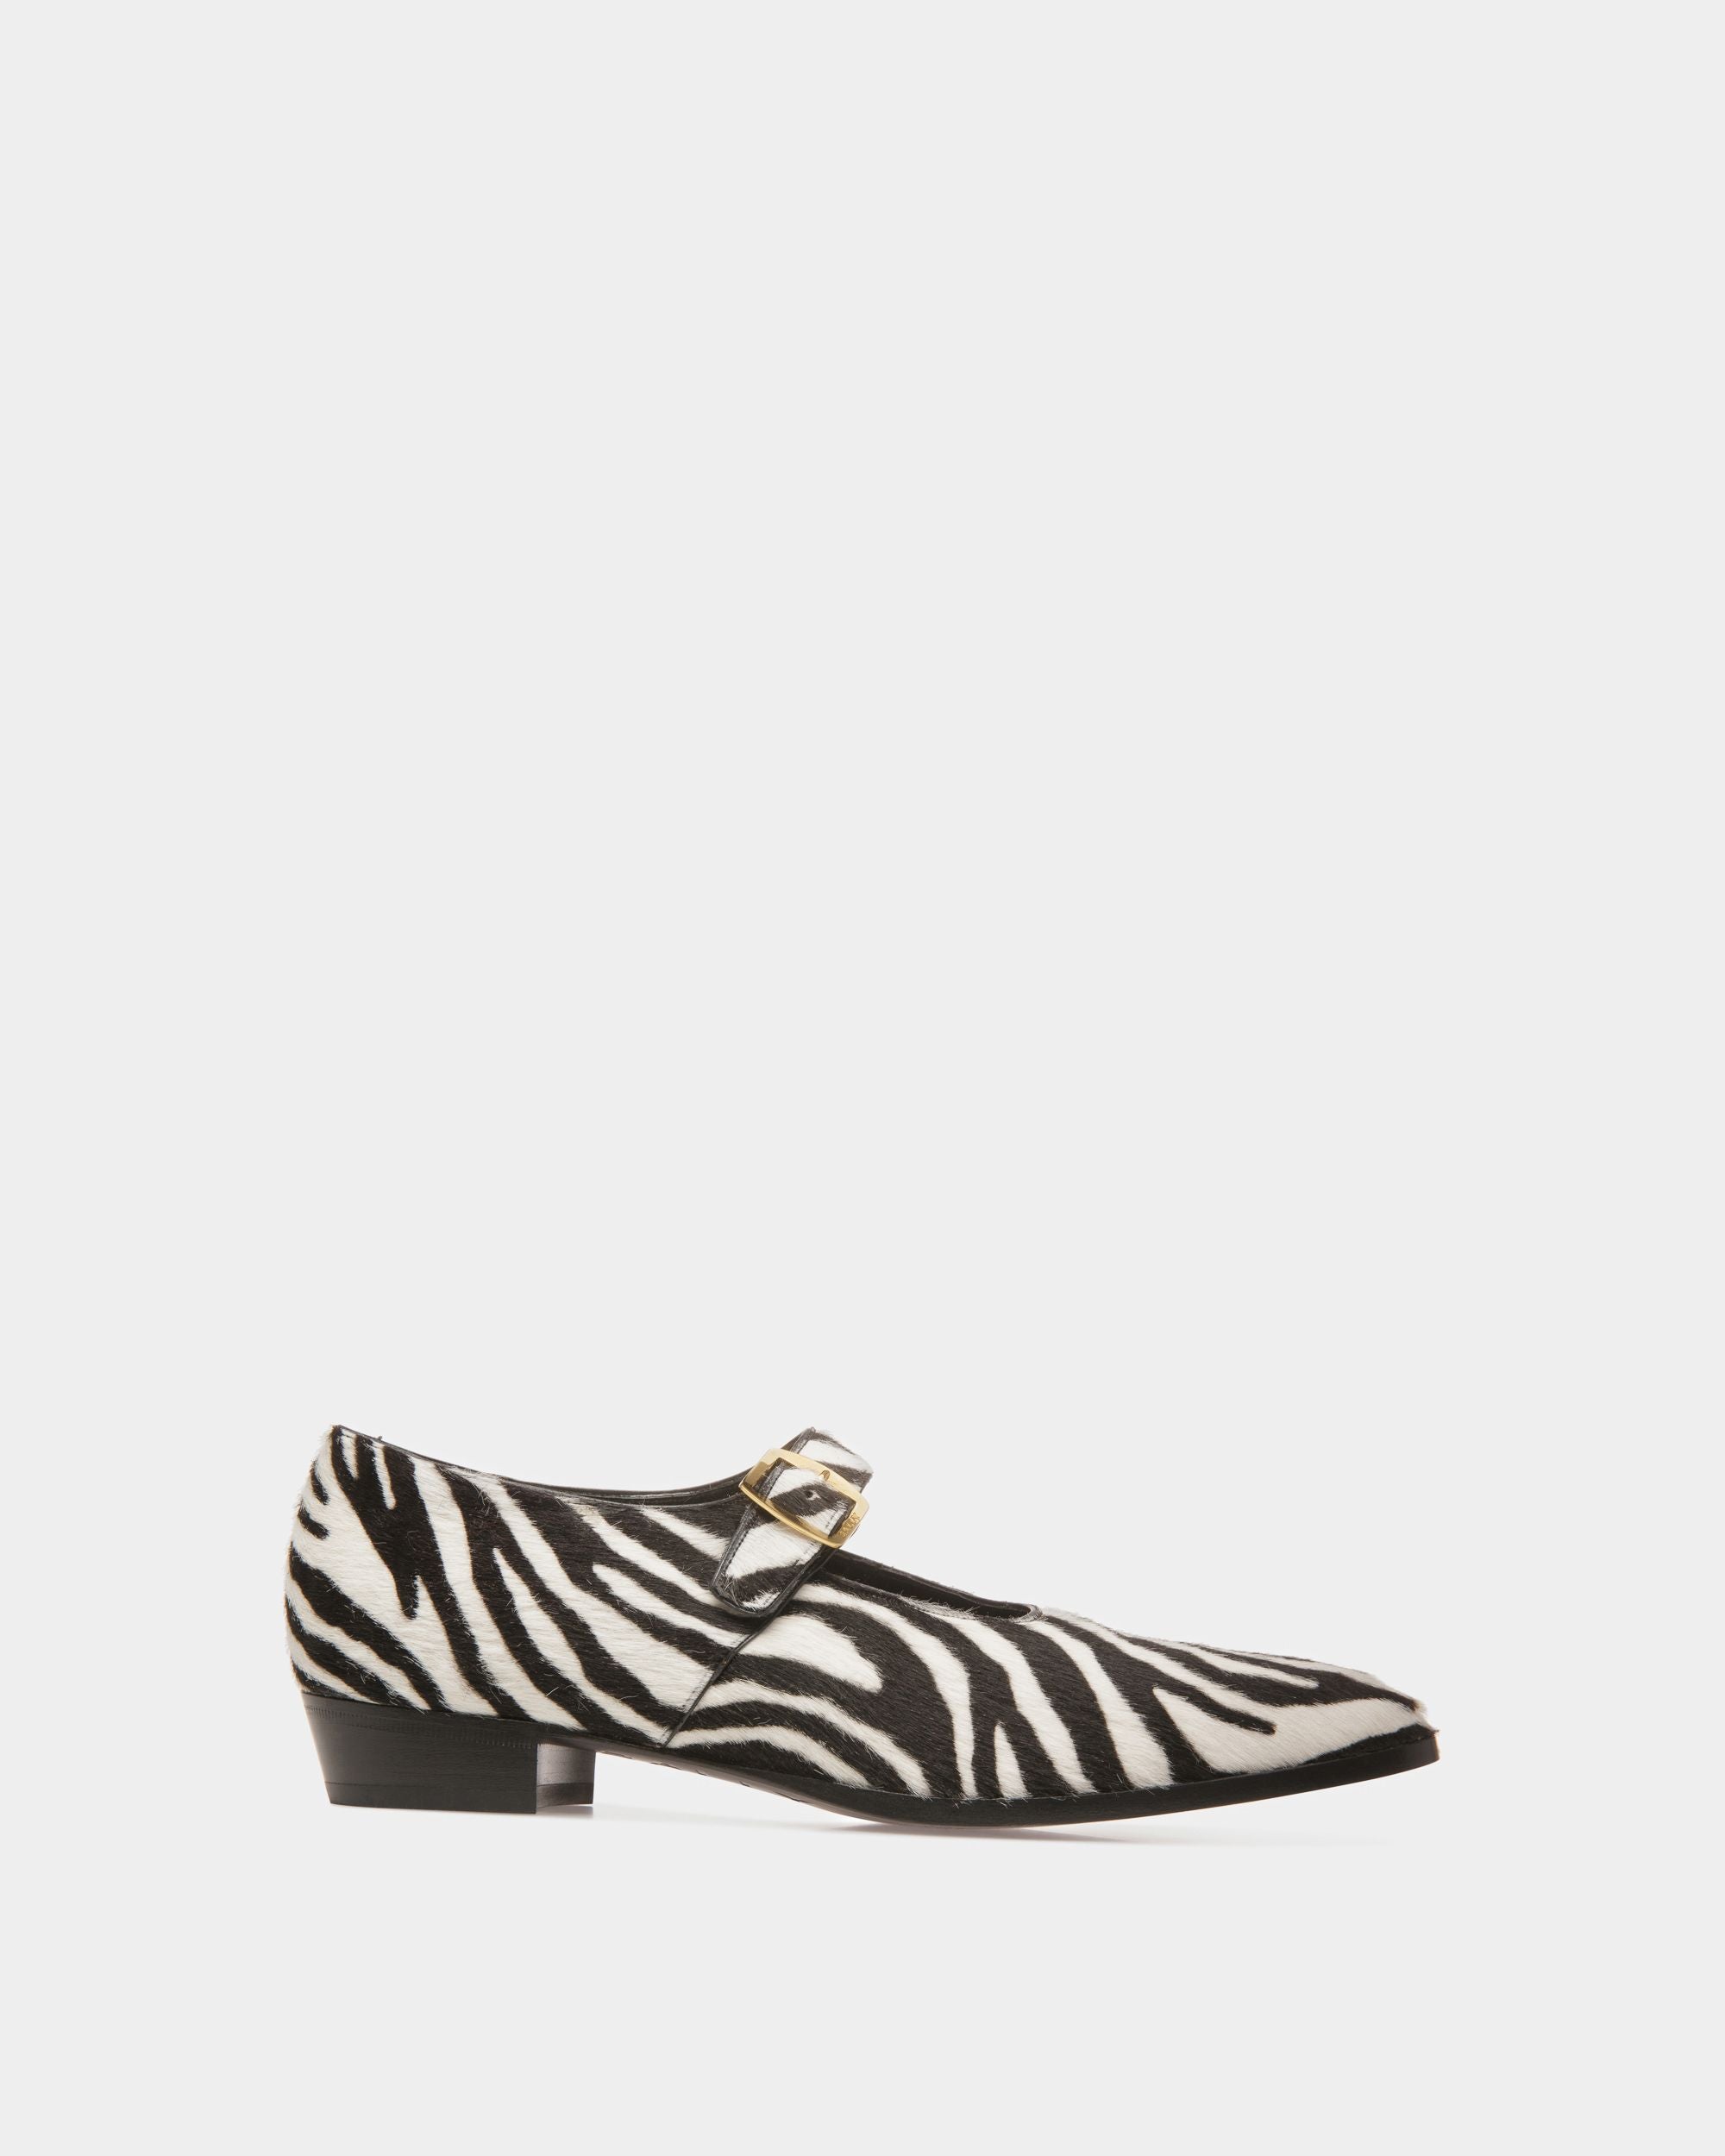 Gerwin | Women's Flats | White And Black Haircalf Leather | Bally | Still Life Side